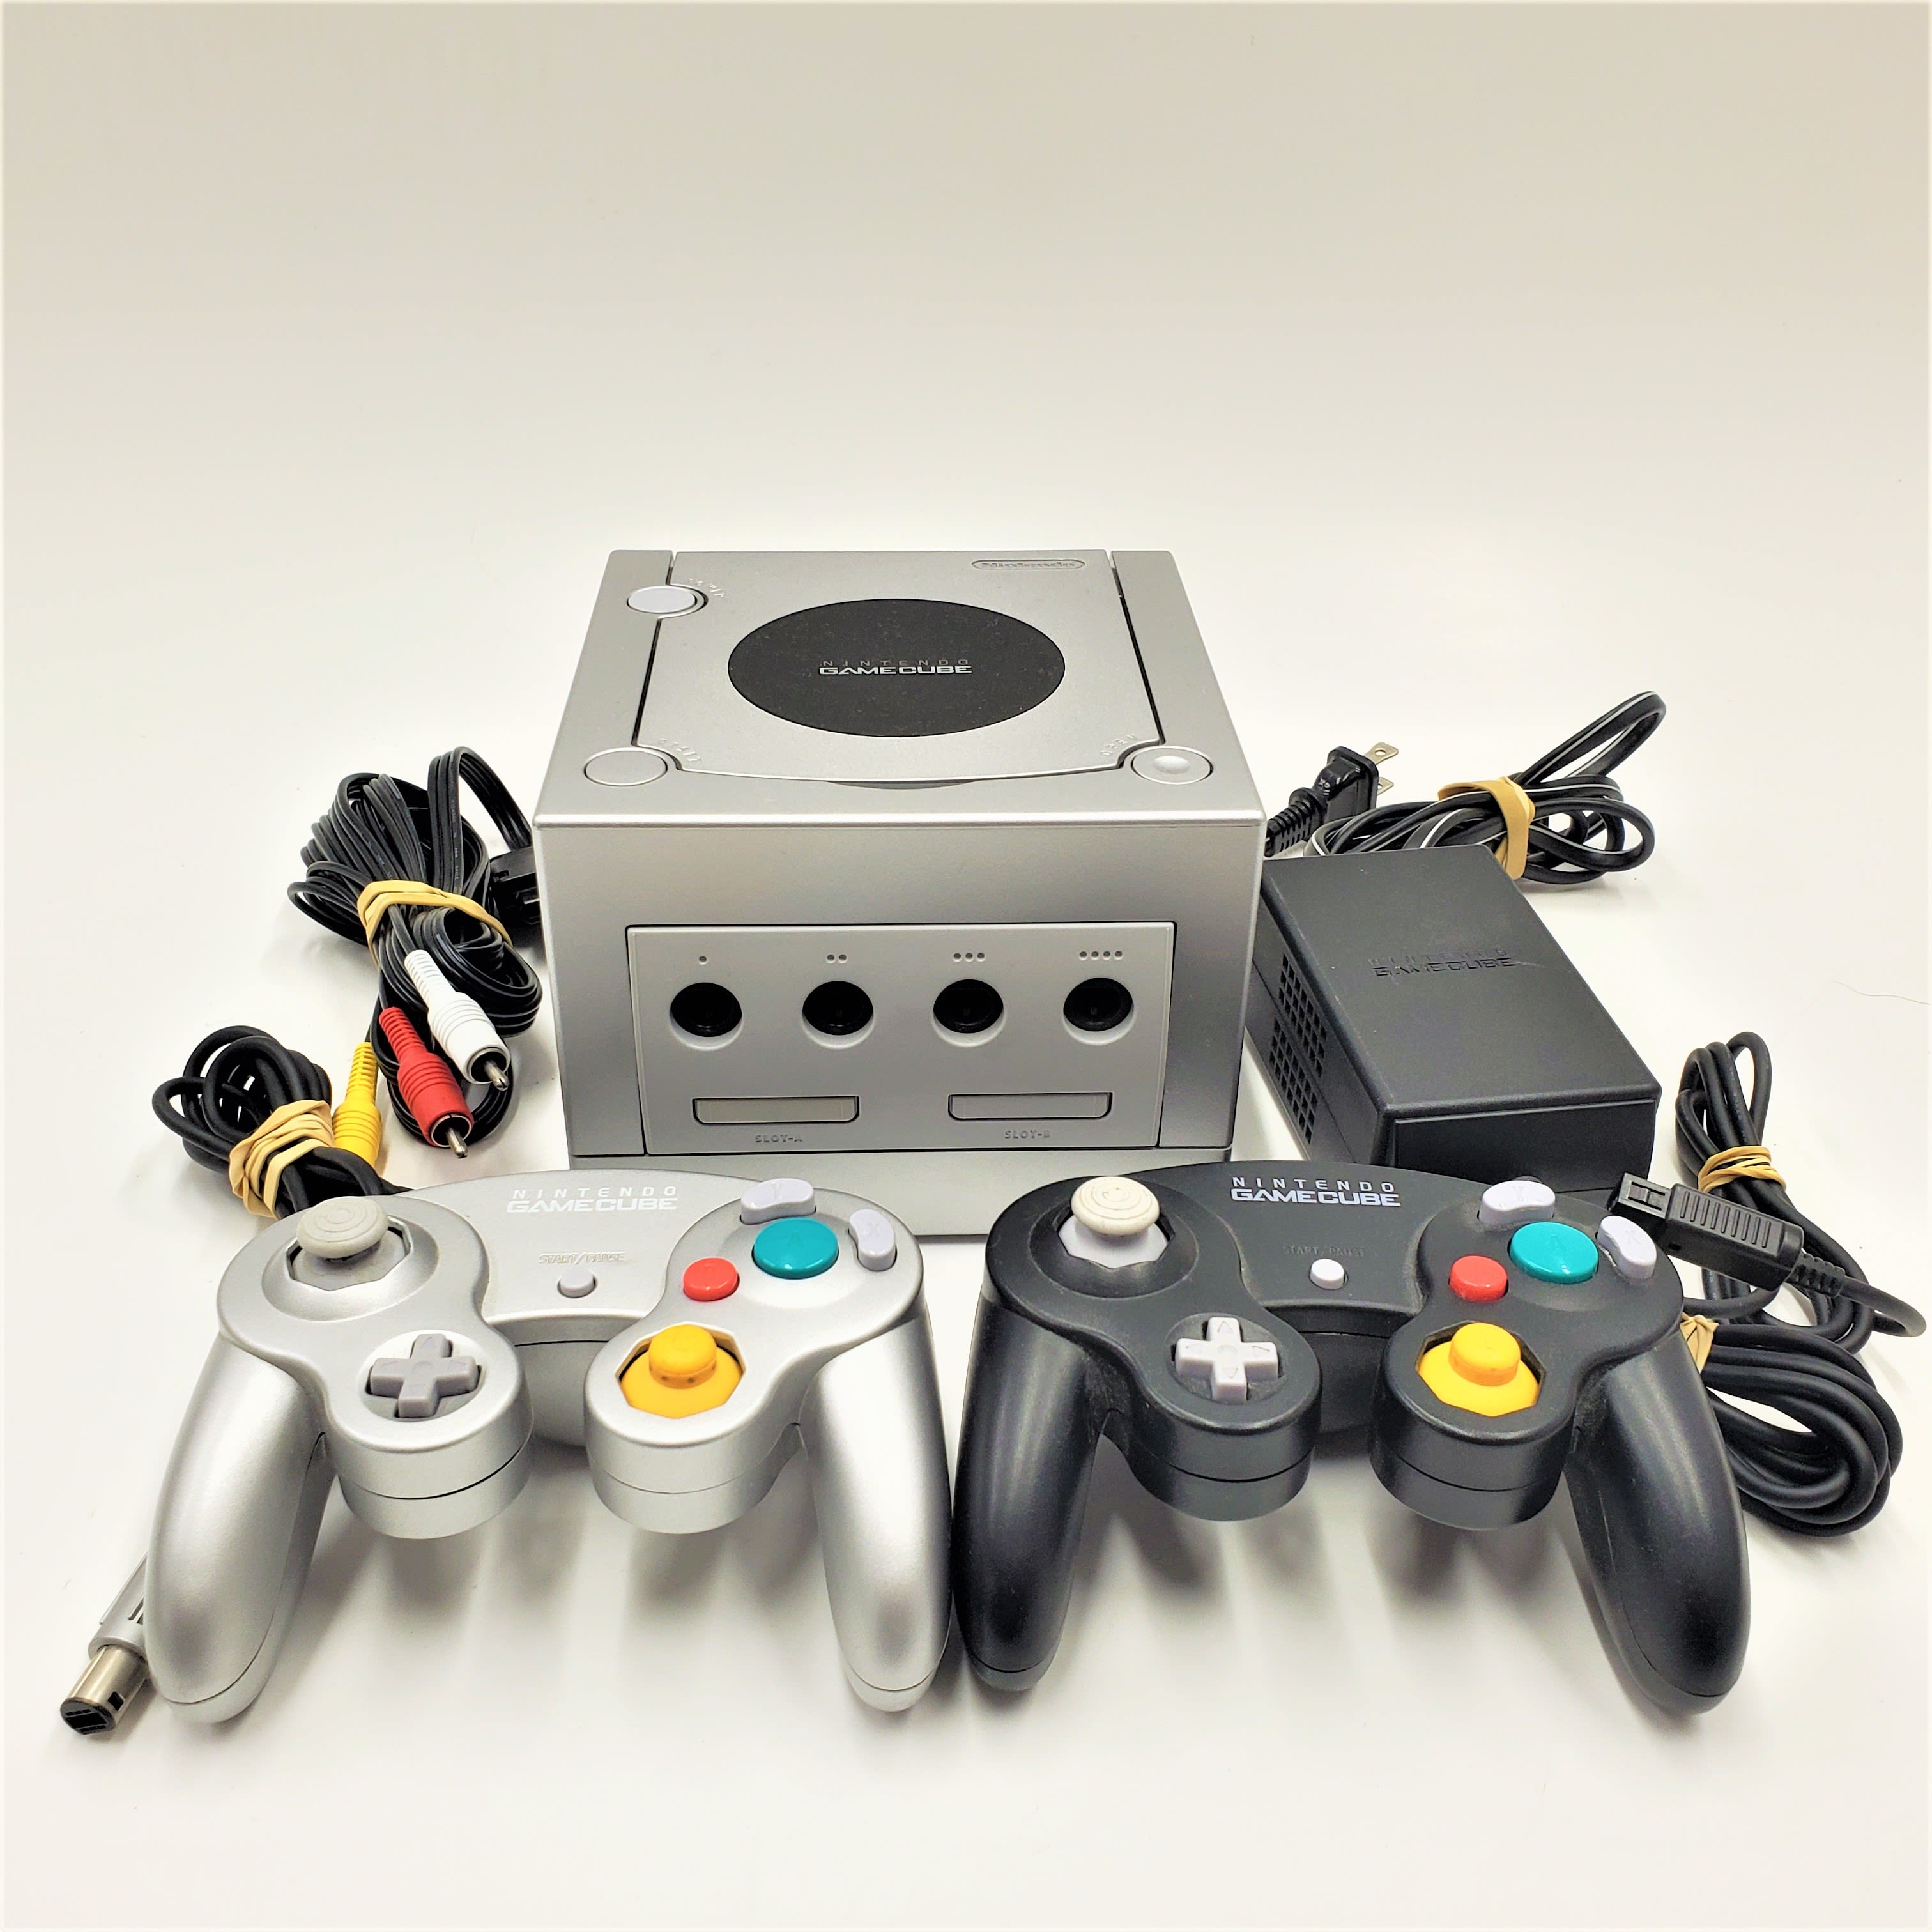 Console Game Cube Silver - Agil-Retrogaming